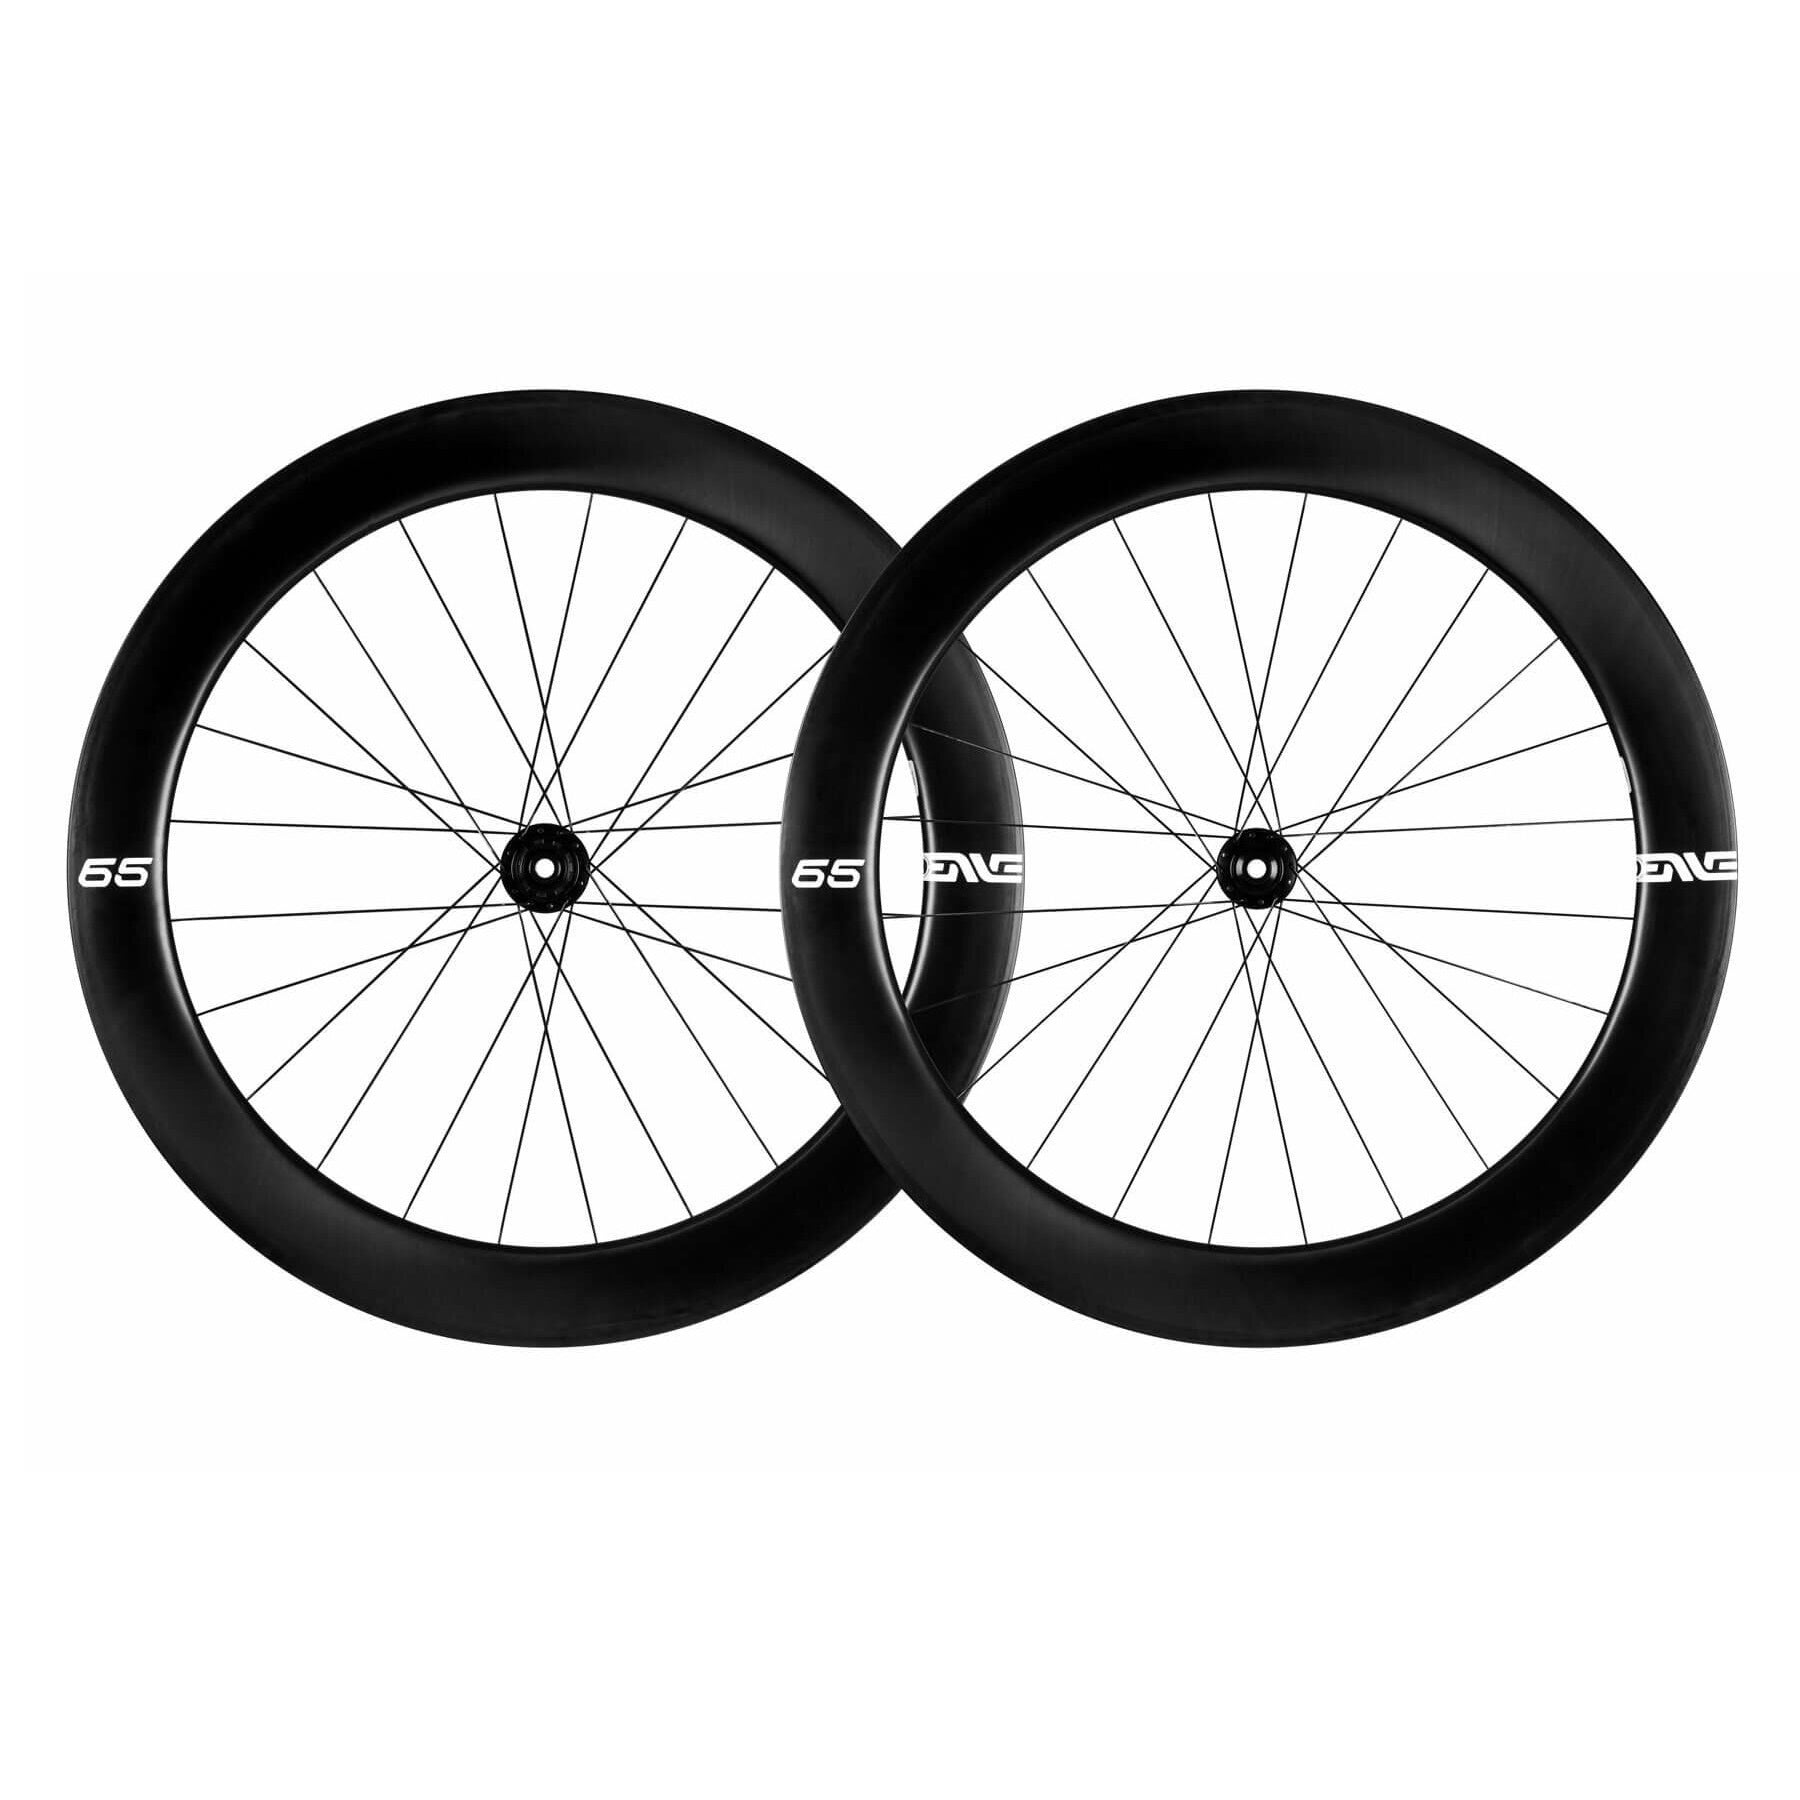 Enve Road and Gravel Tubeless Kit (AG25) (29mm) - Performance Bicycle